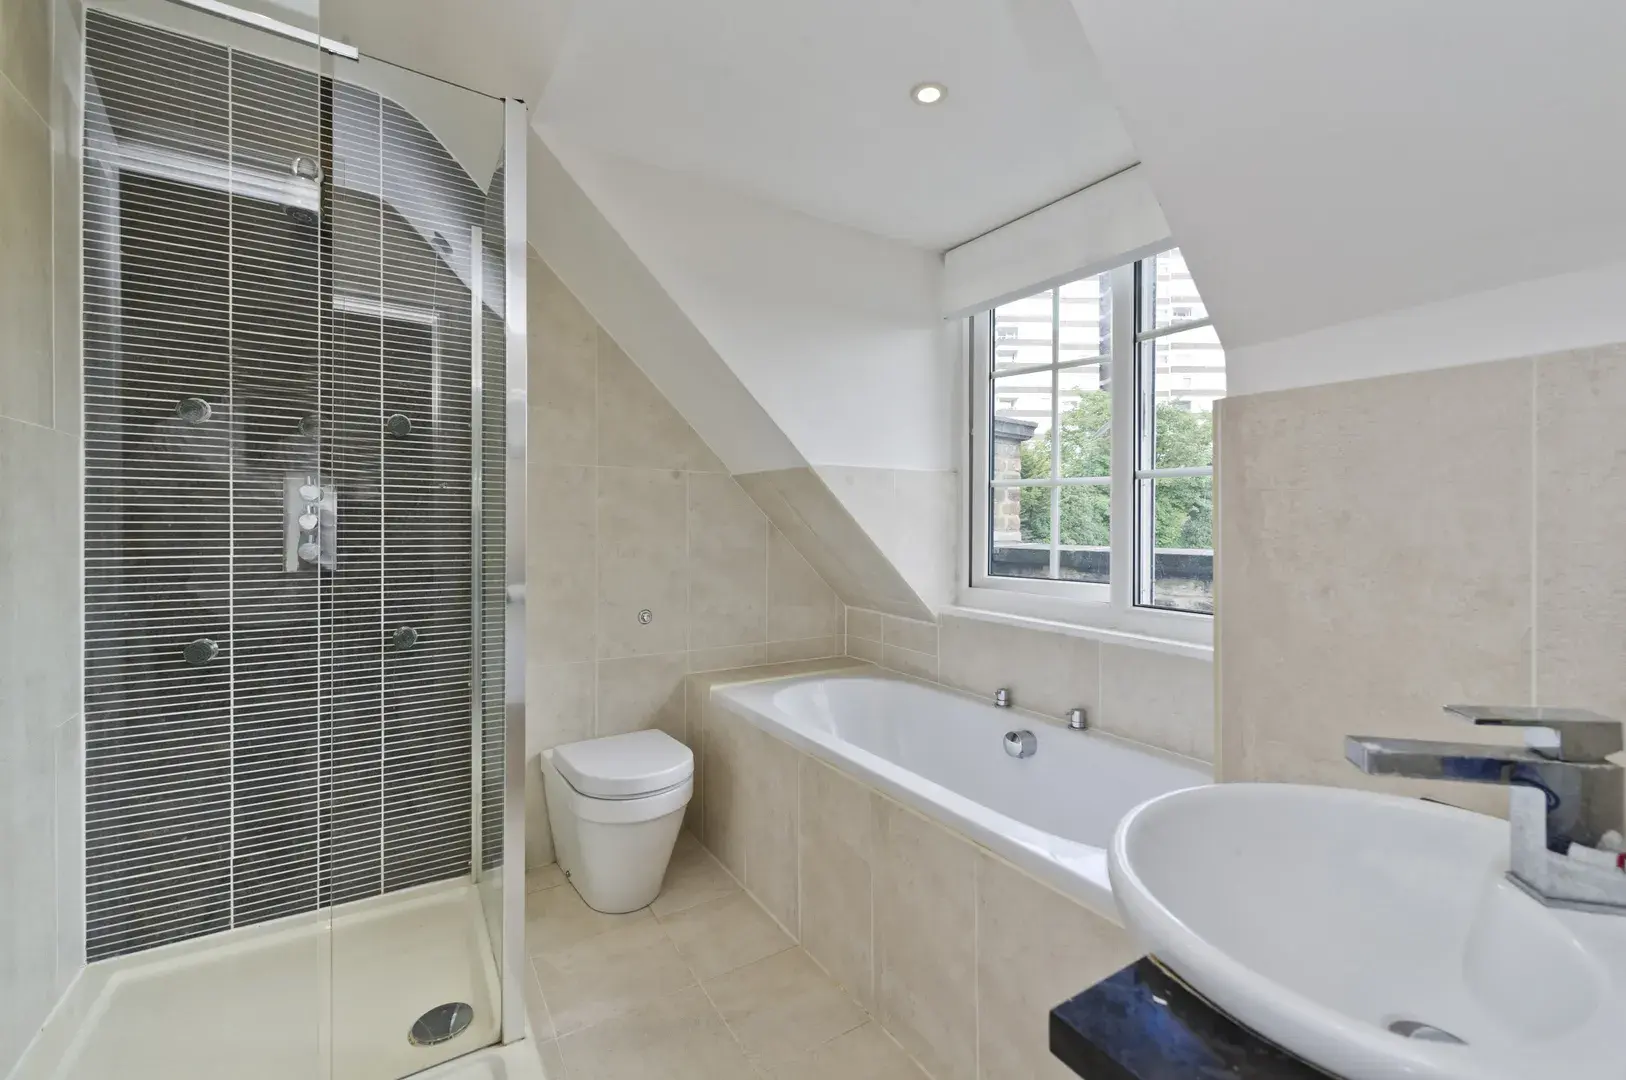 Somerset Road, holiday home in Wimbledon – South London, London